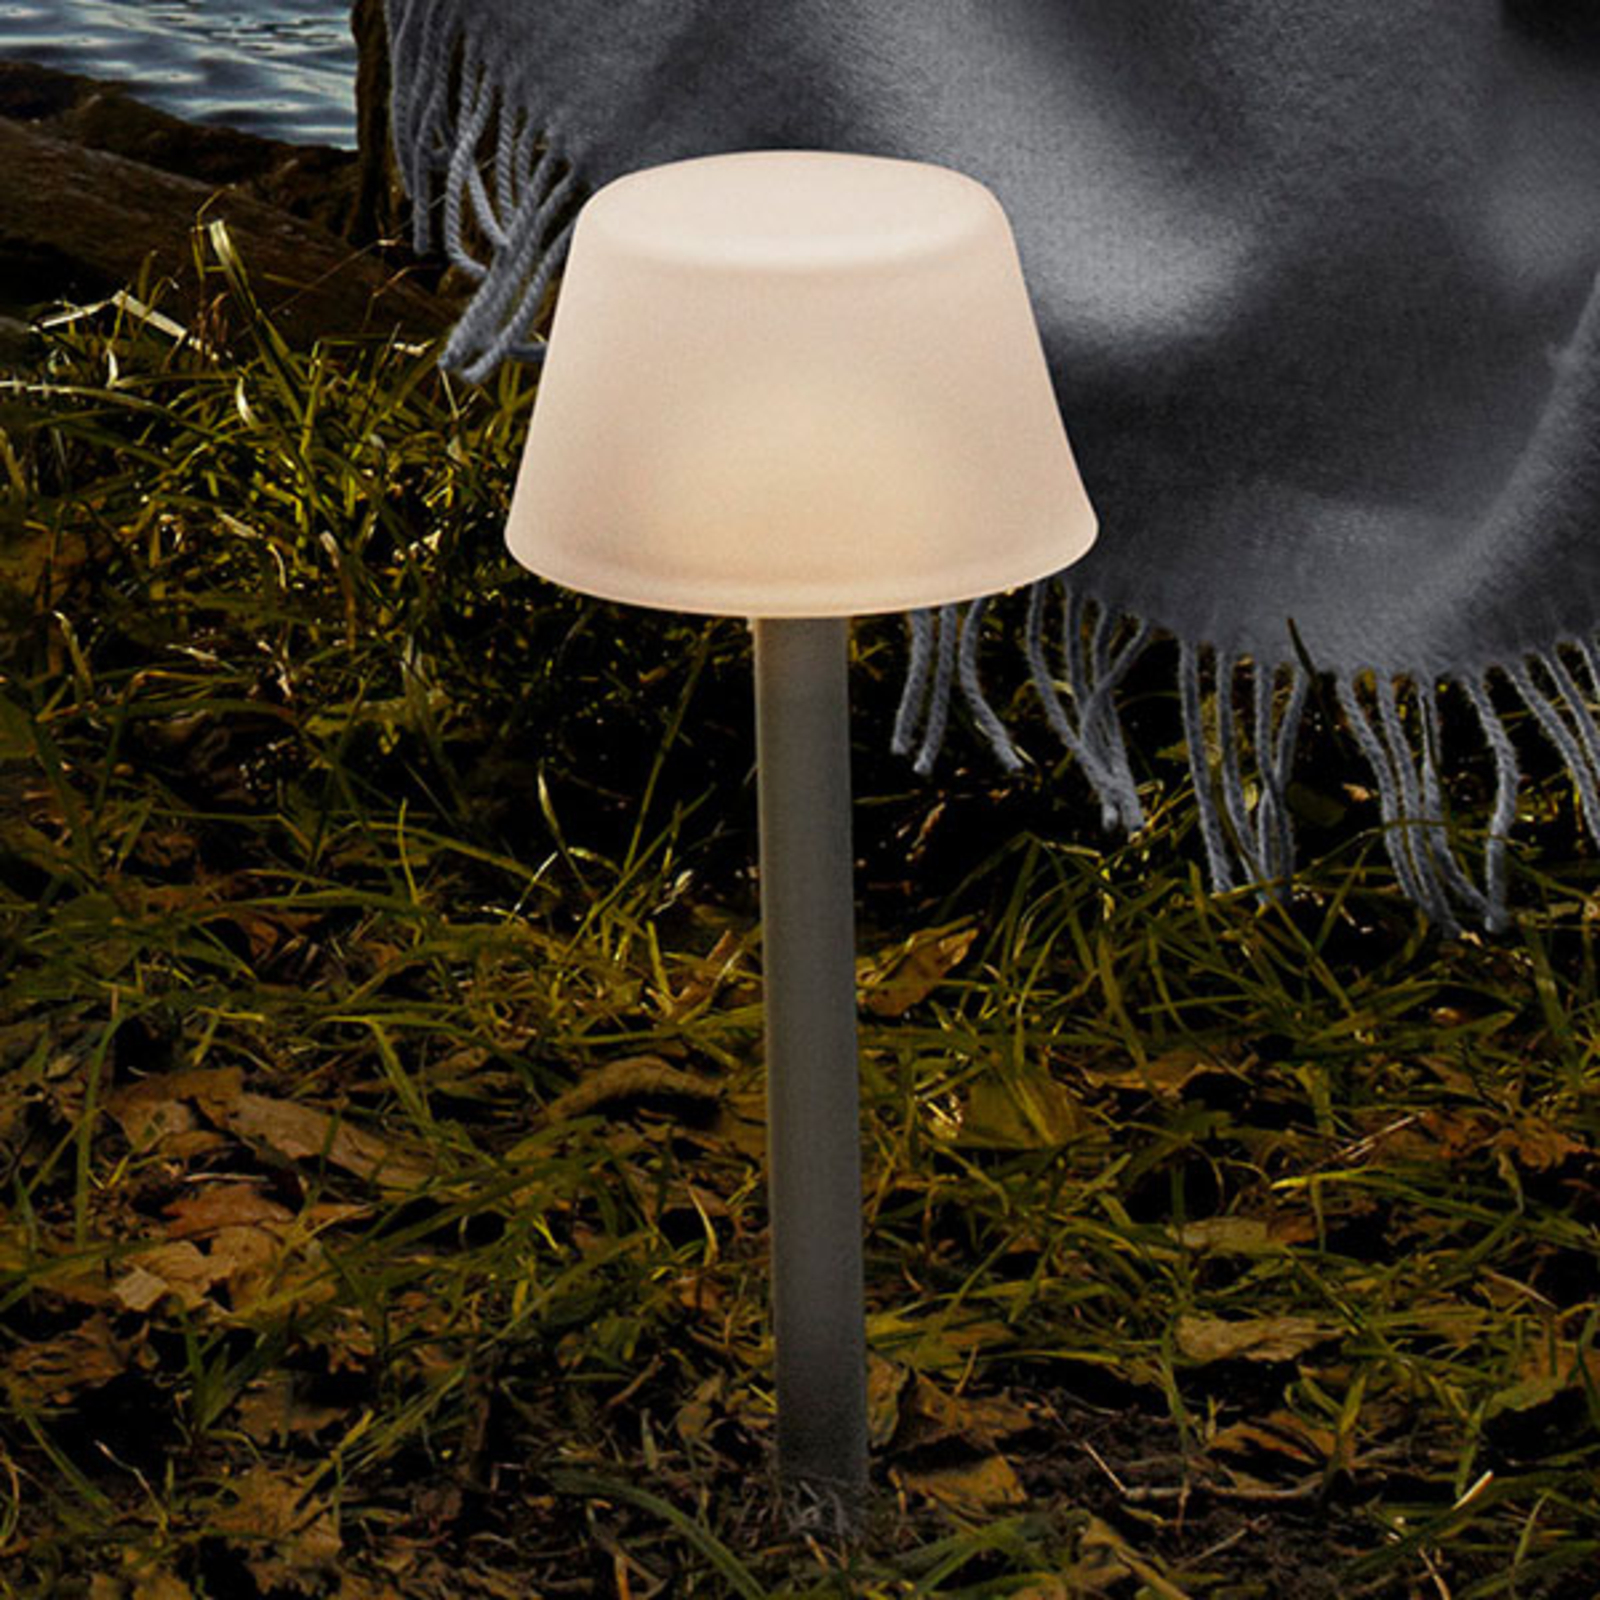 Eva Solo SunLight solar ground spike lamp, frosted